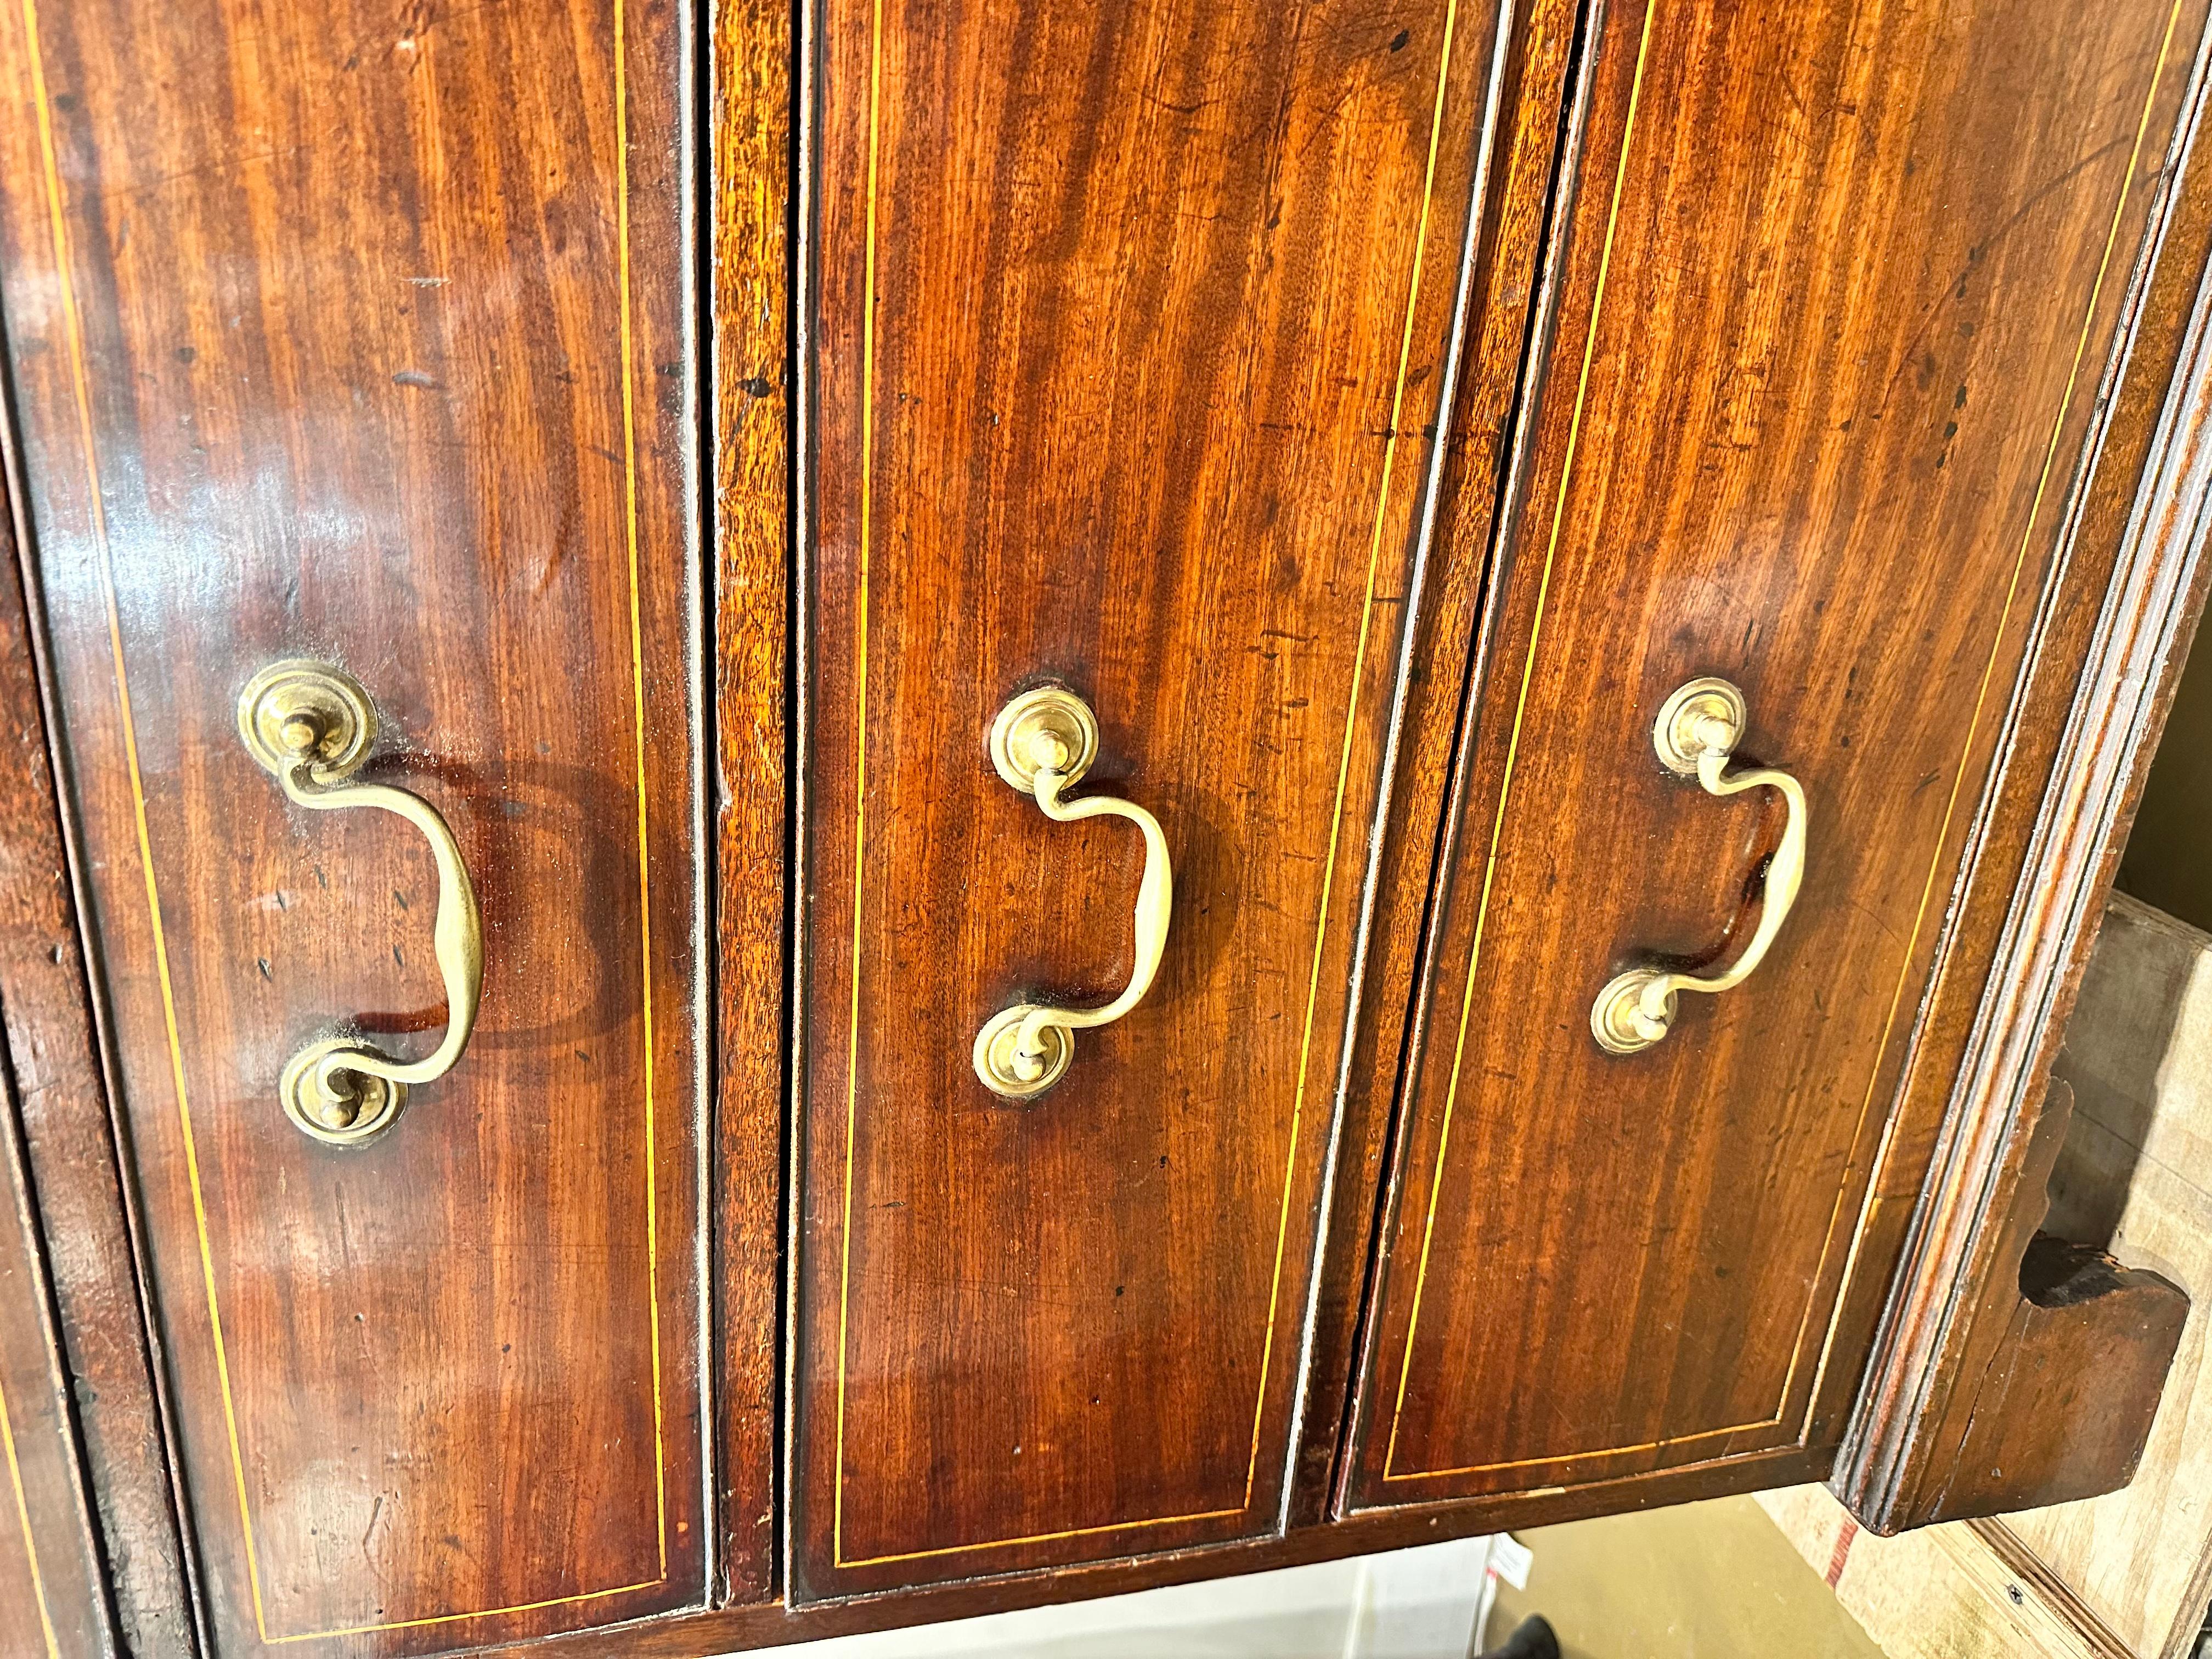 This is a beautiful 19th century chest of drawers! Two over three, and very square design, this piece has a masculine yet attractive style to it. It has rich patina and high gloss with horizontal natural detail running across the drawers and top.